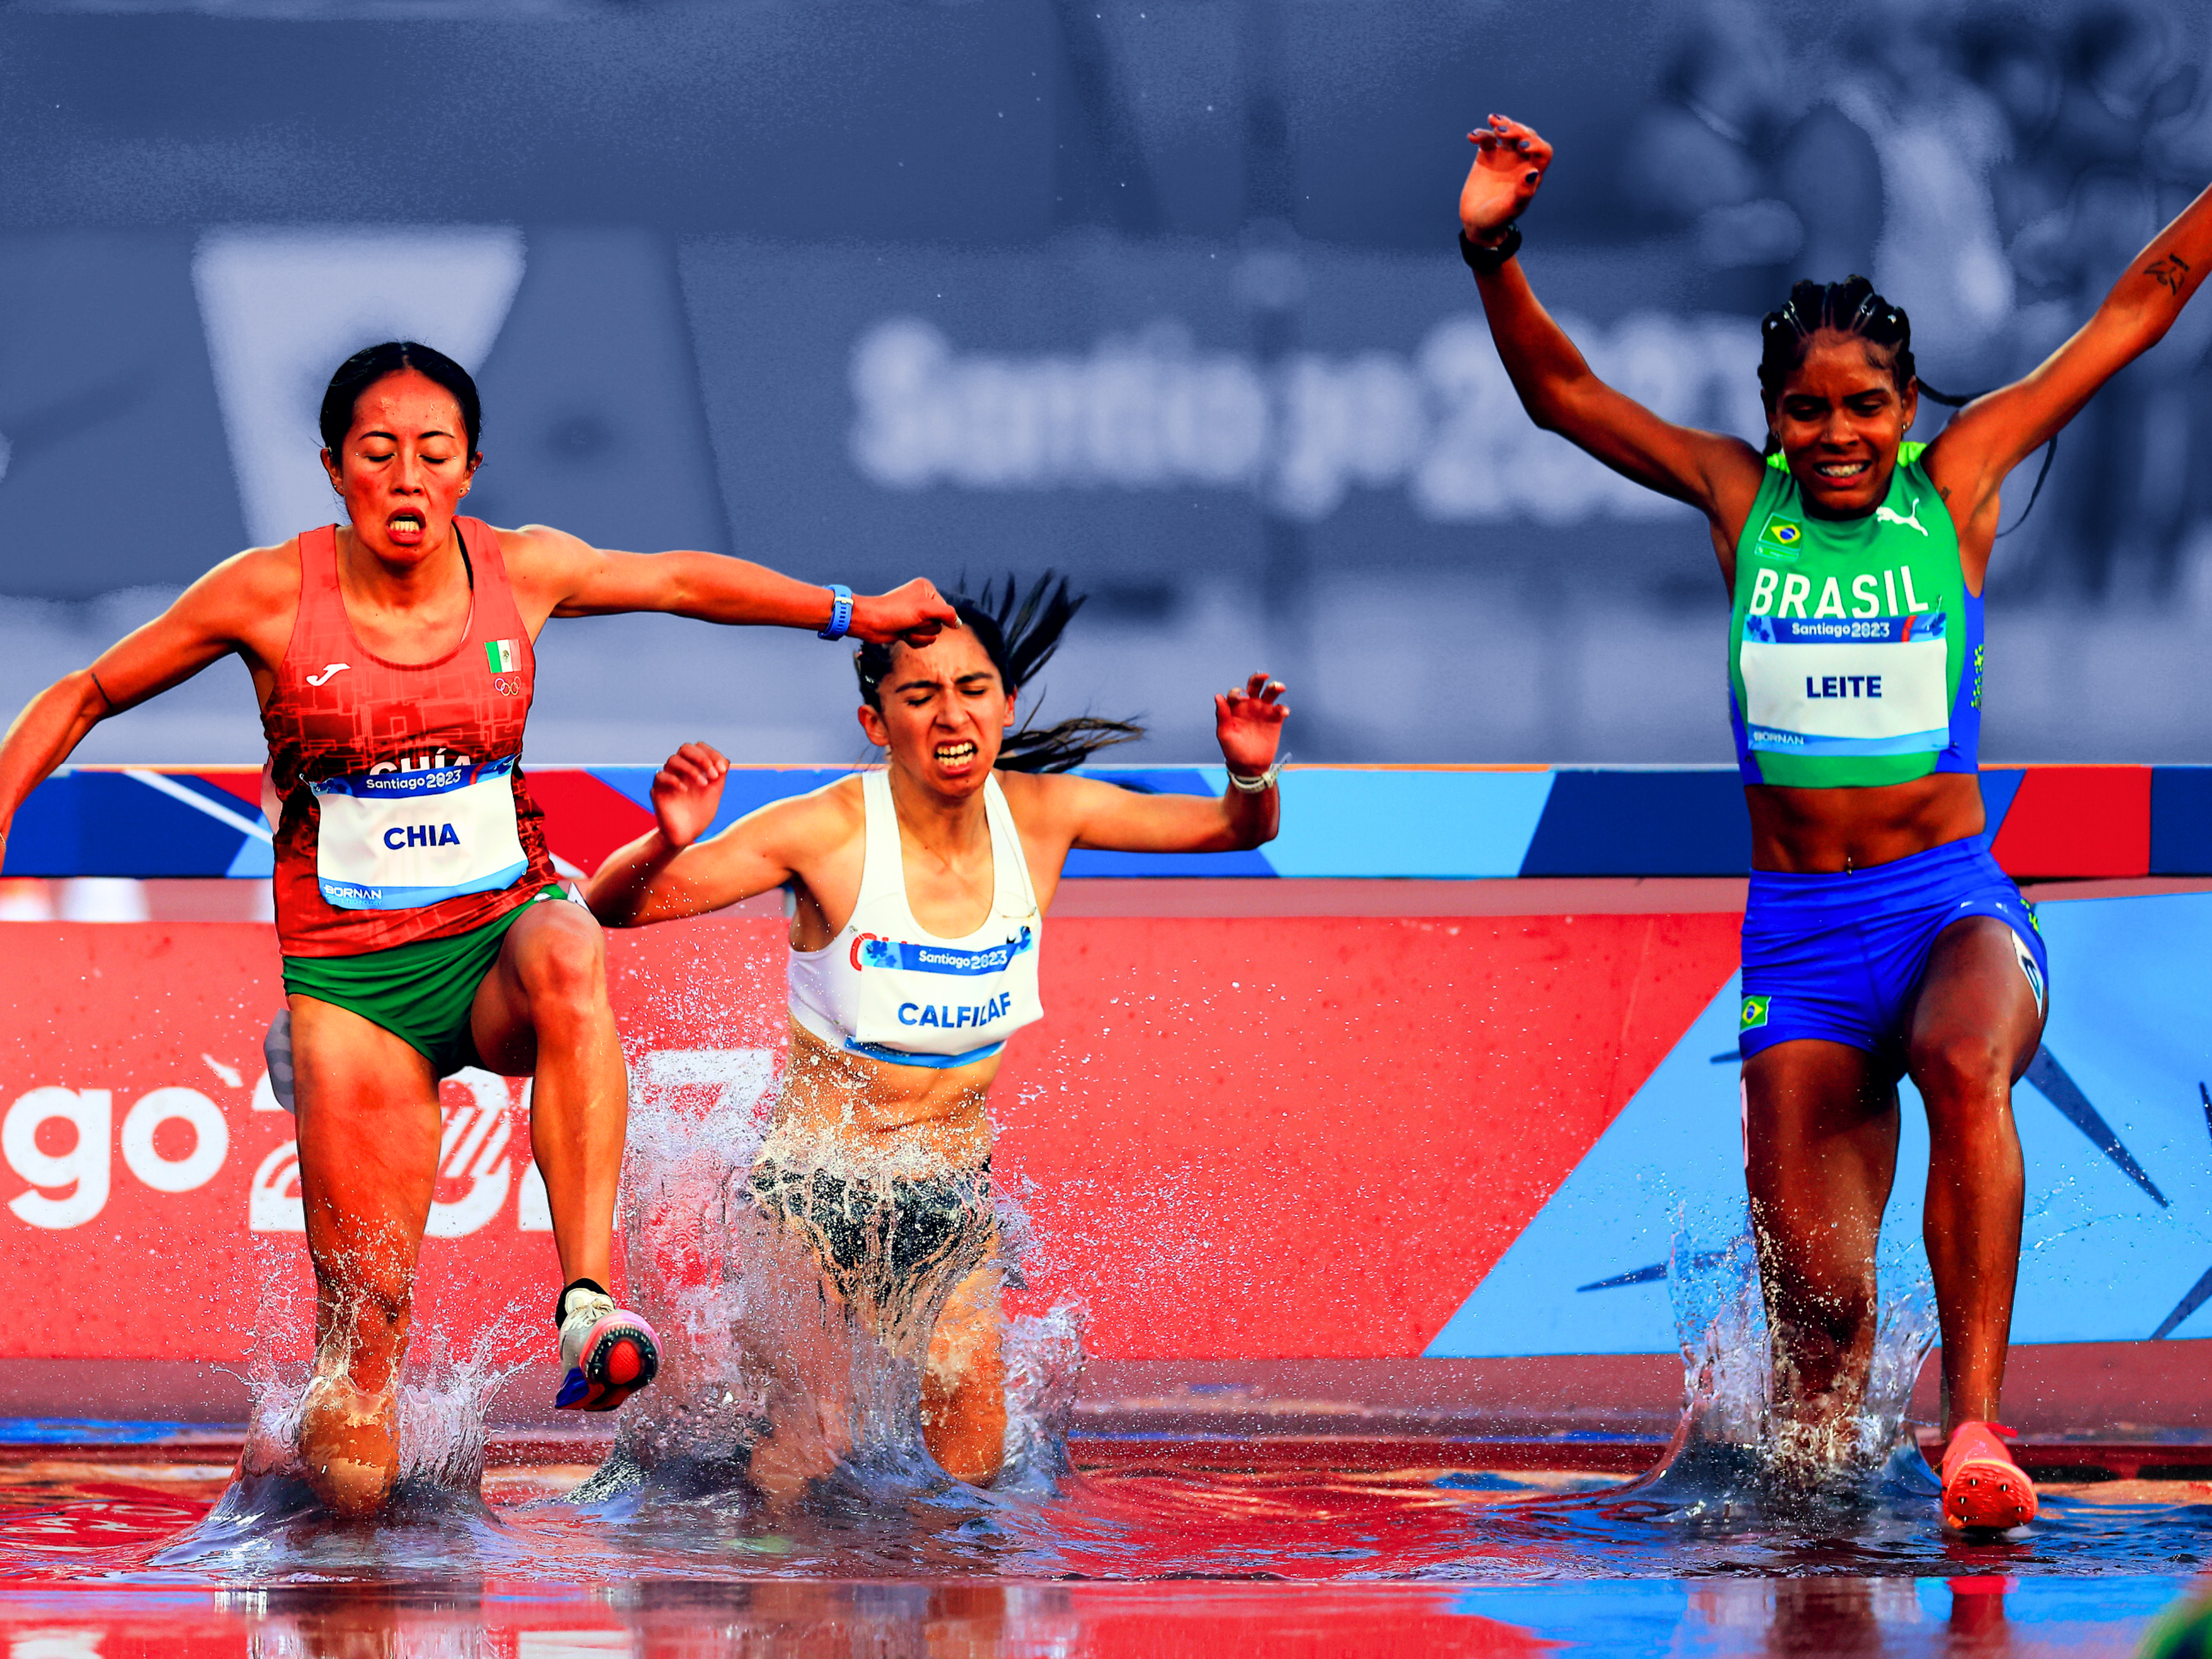 What Is Steeplechase—And Why Is There a Water Pit in the Middle of the Track?!